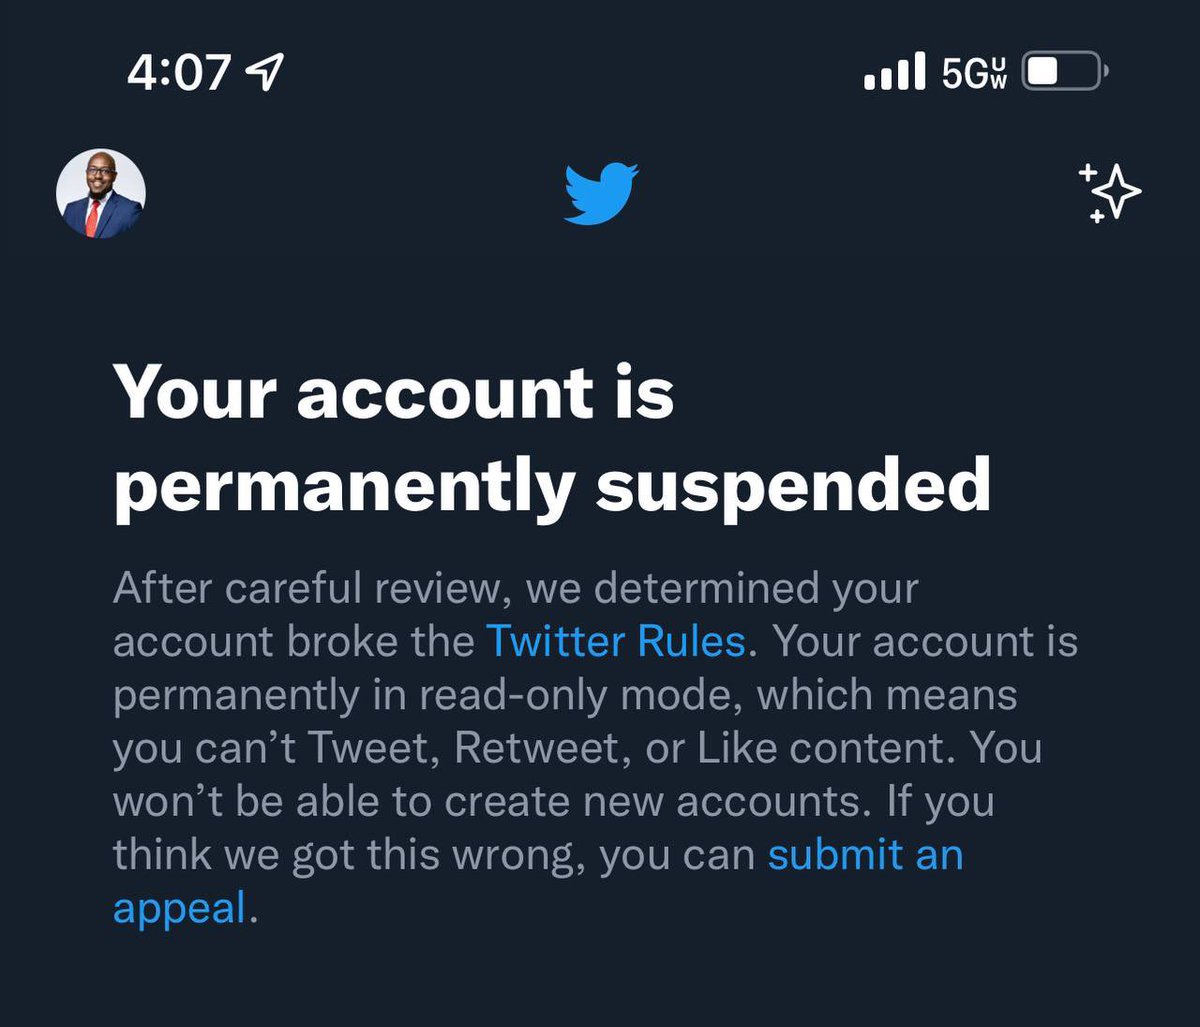 Yesterday on the eve of FL's primary elections, Twitter suspended my account permanently without warning or reason. This is election interference, bordering on criminality. (1/3)